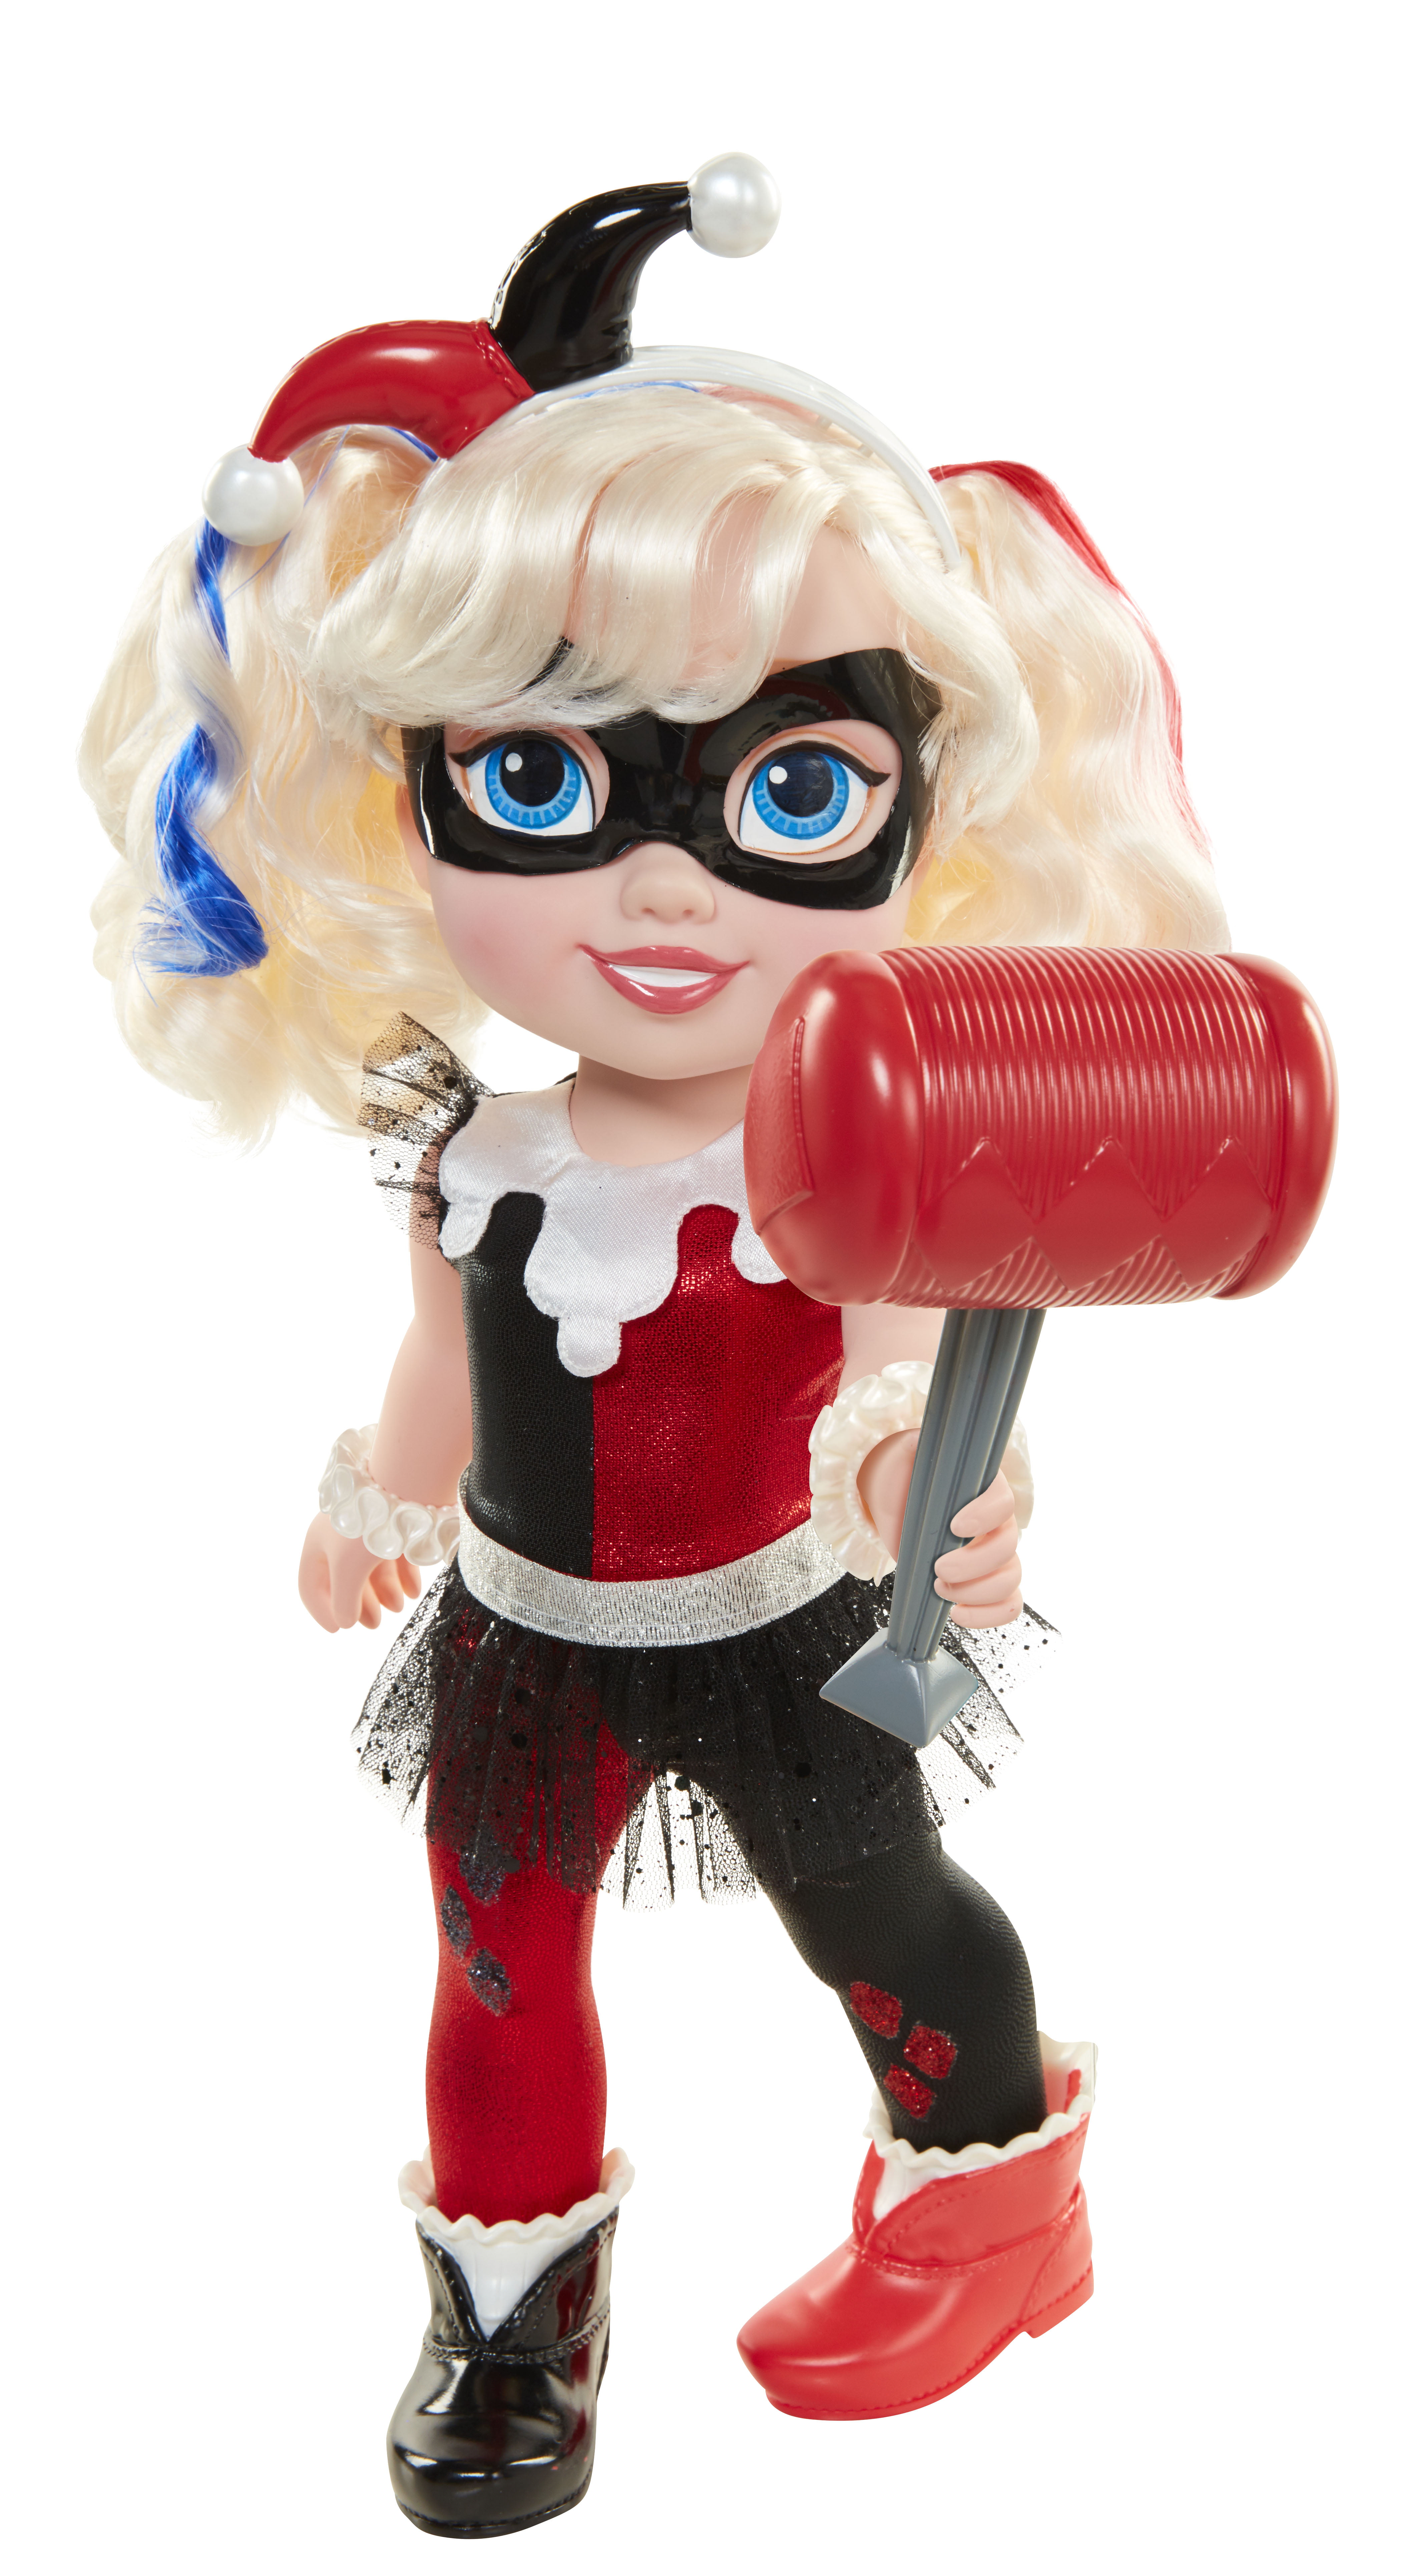 Dc Super Hero Girls Harley Quinn Doll With Mallet Original Release My